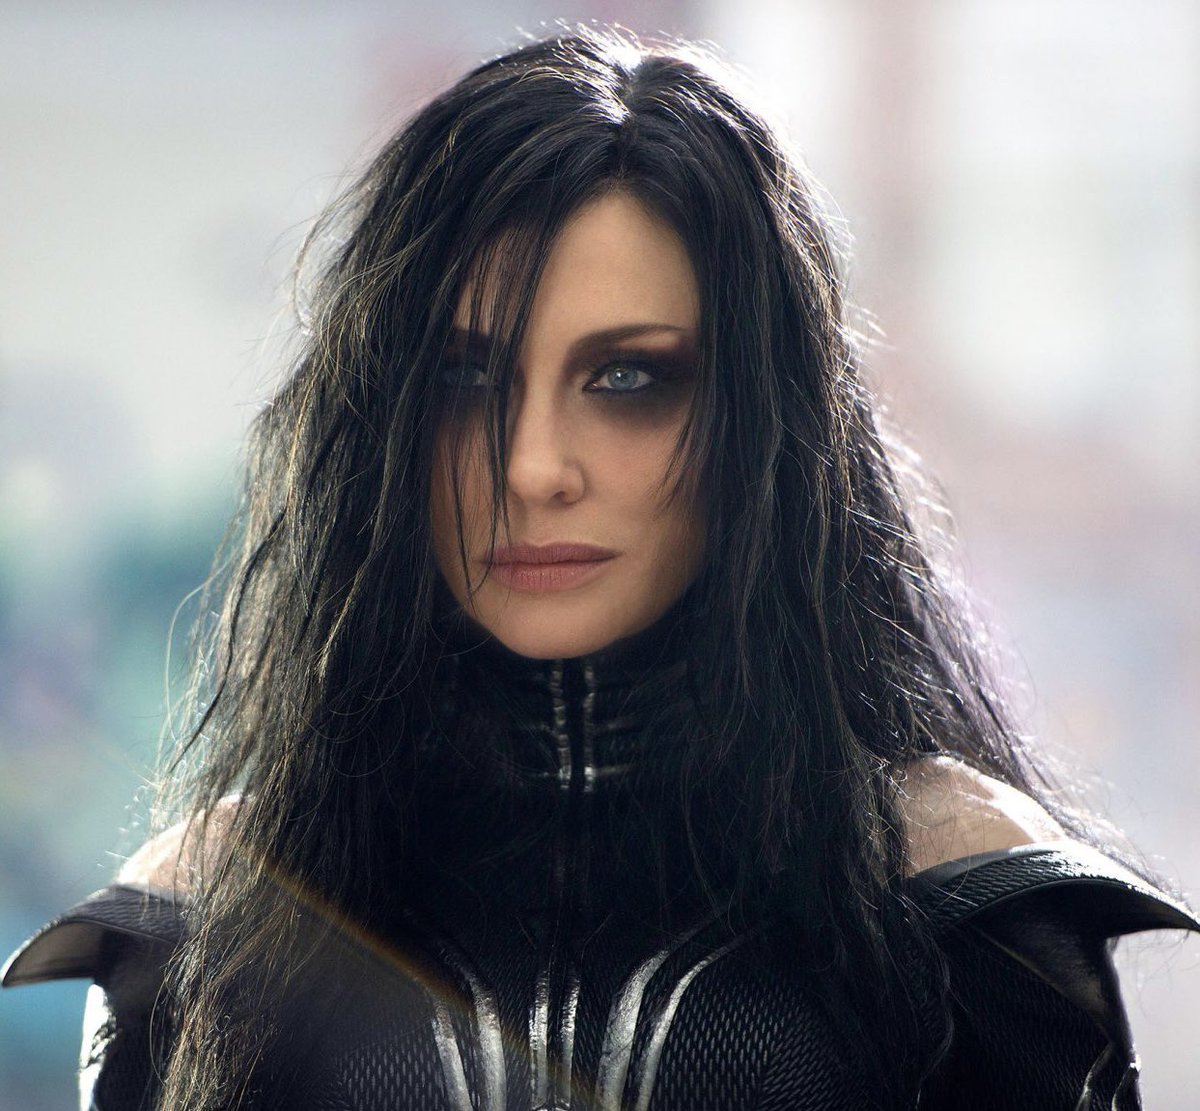 I just want Hela to return tbh 
She’s Thor’s long lost sister, you really think she’d die to just falling rubble? Nah https://t.co/XFM9Y9NMU1